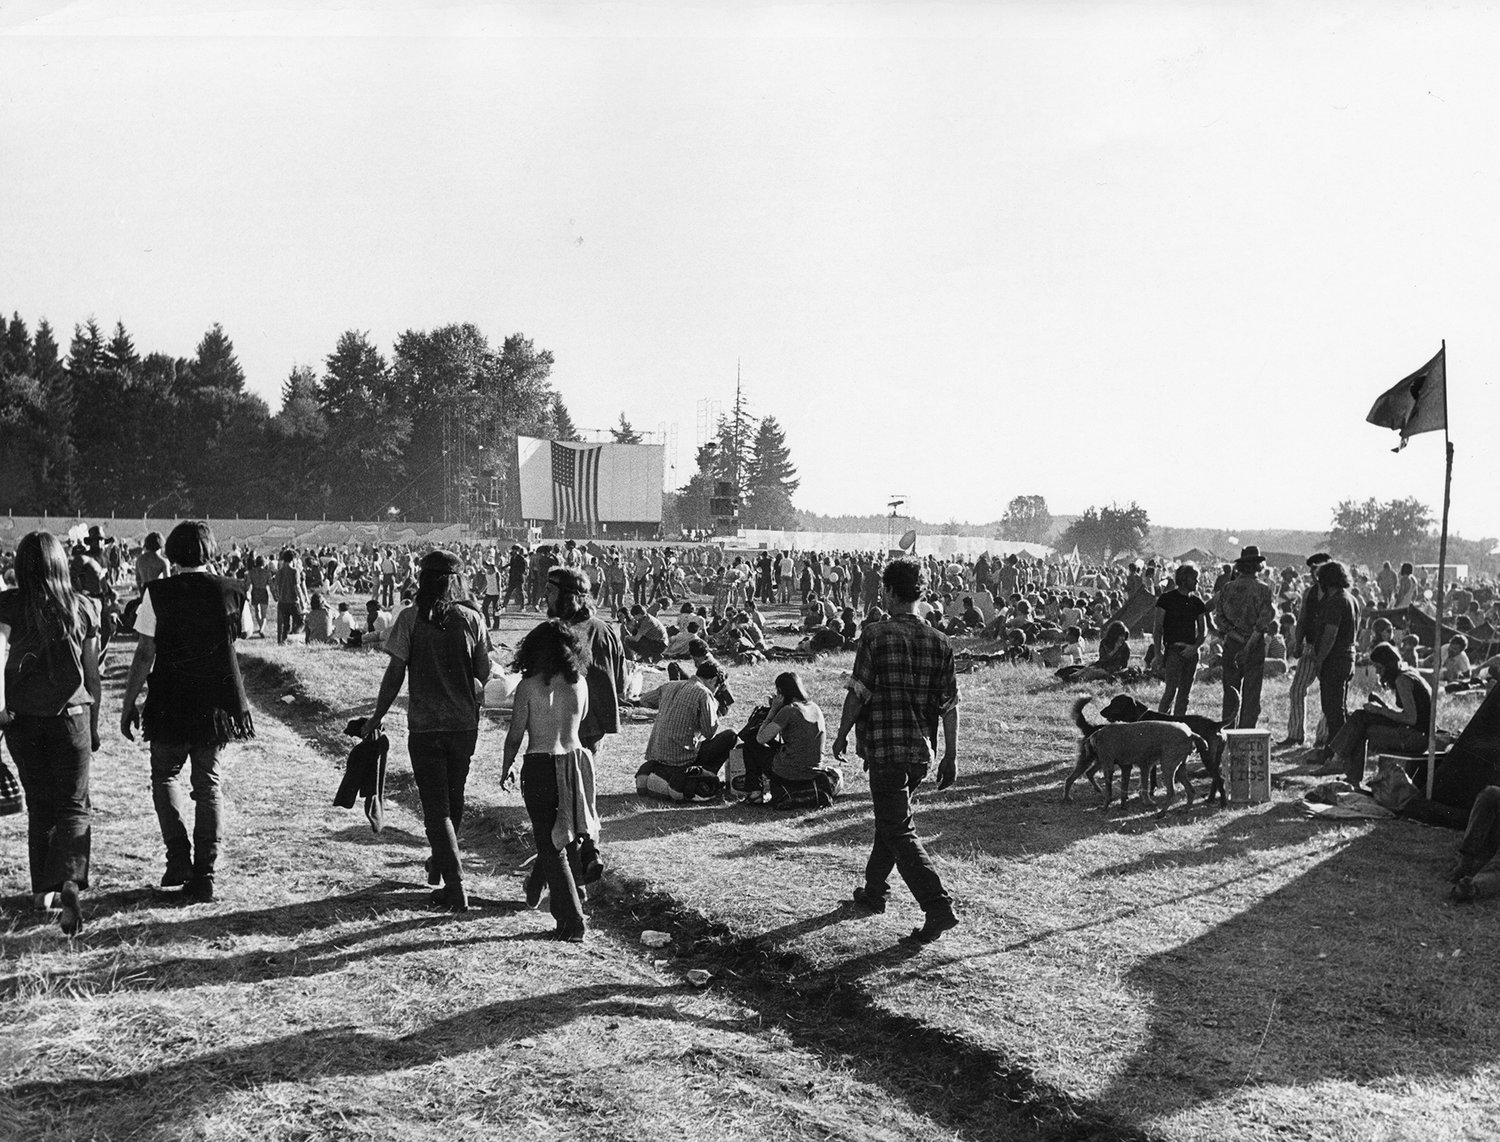 The Tenino Sky River Rock Festival and Lighter Than Air Fair, which took place on Labor Day weekend in 1969, attracted huge crowds and featured 18 hours a day of music.